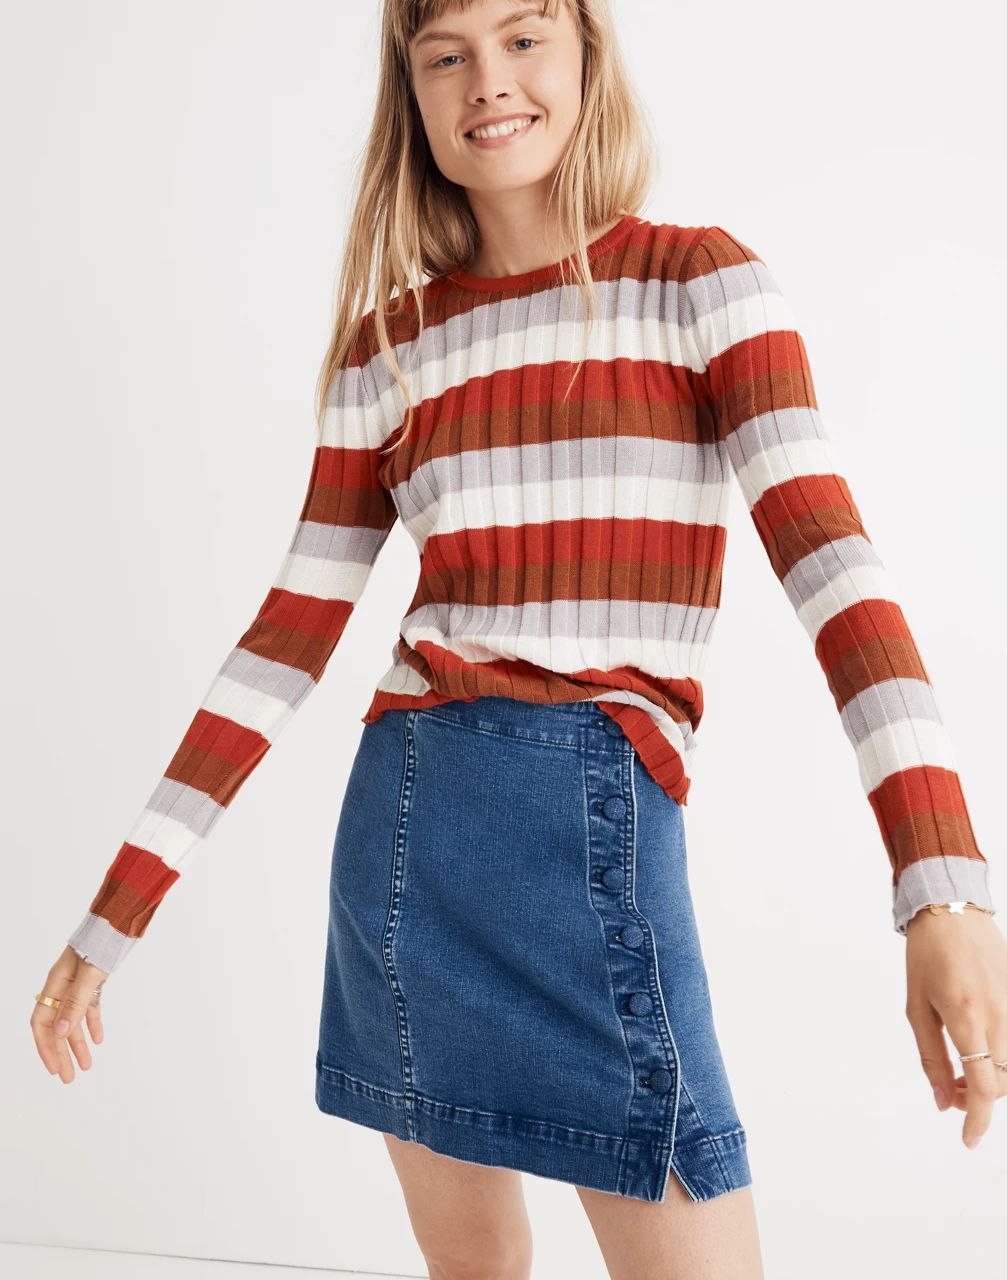 Clarkwell Pullover Sweater in Stripe | Madewell